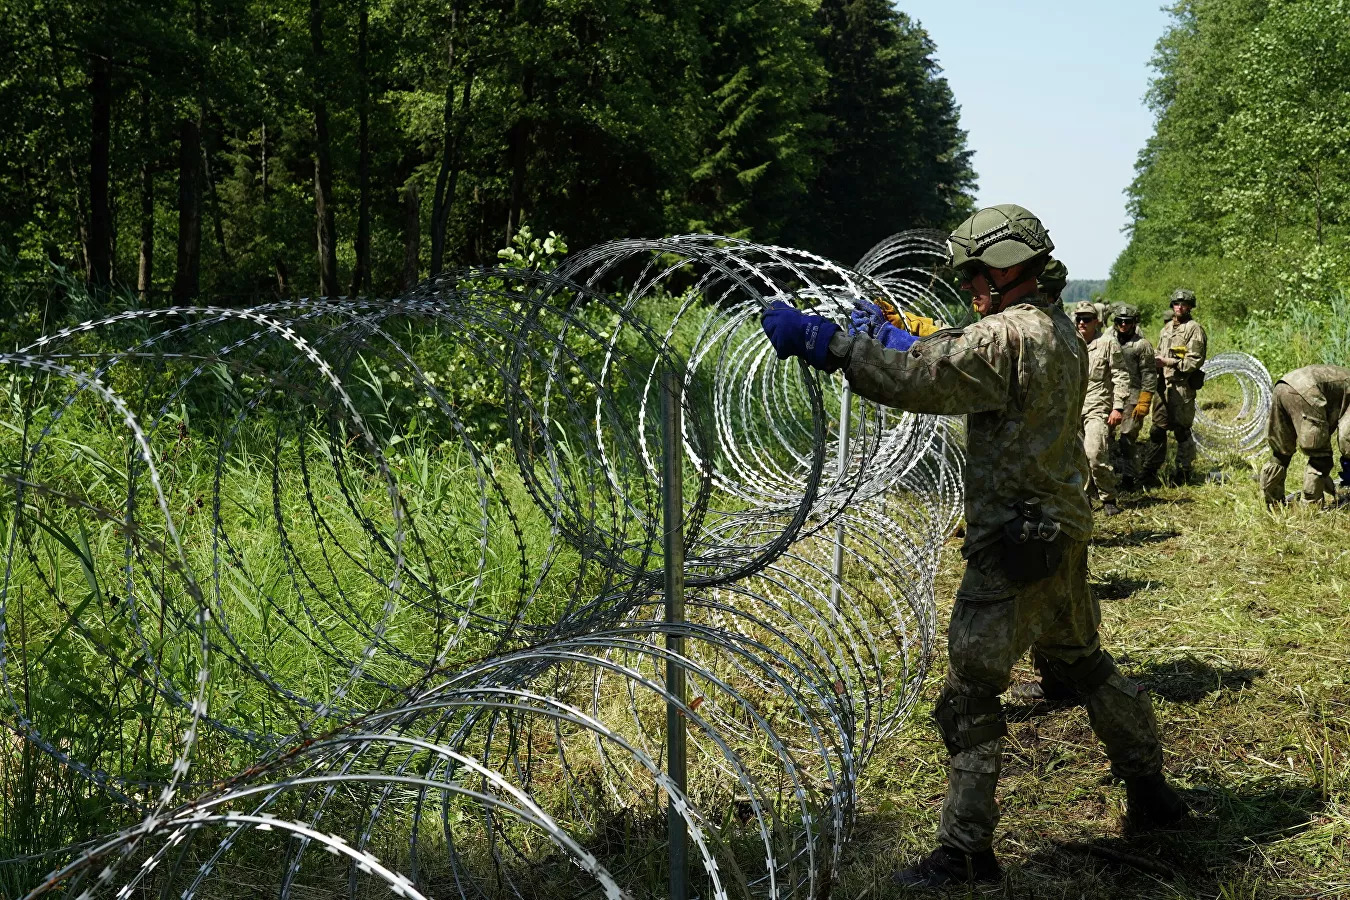 Lithuania Concludes Its Subject To "Hybrid Aggression" Deploys Military To Protect Its Border